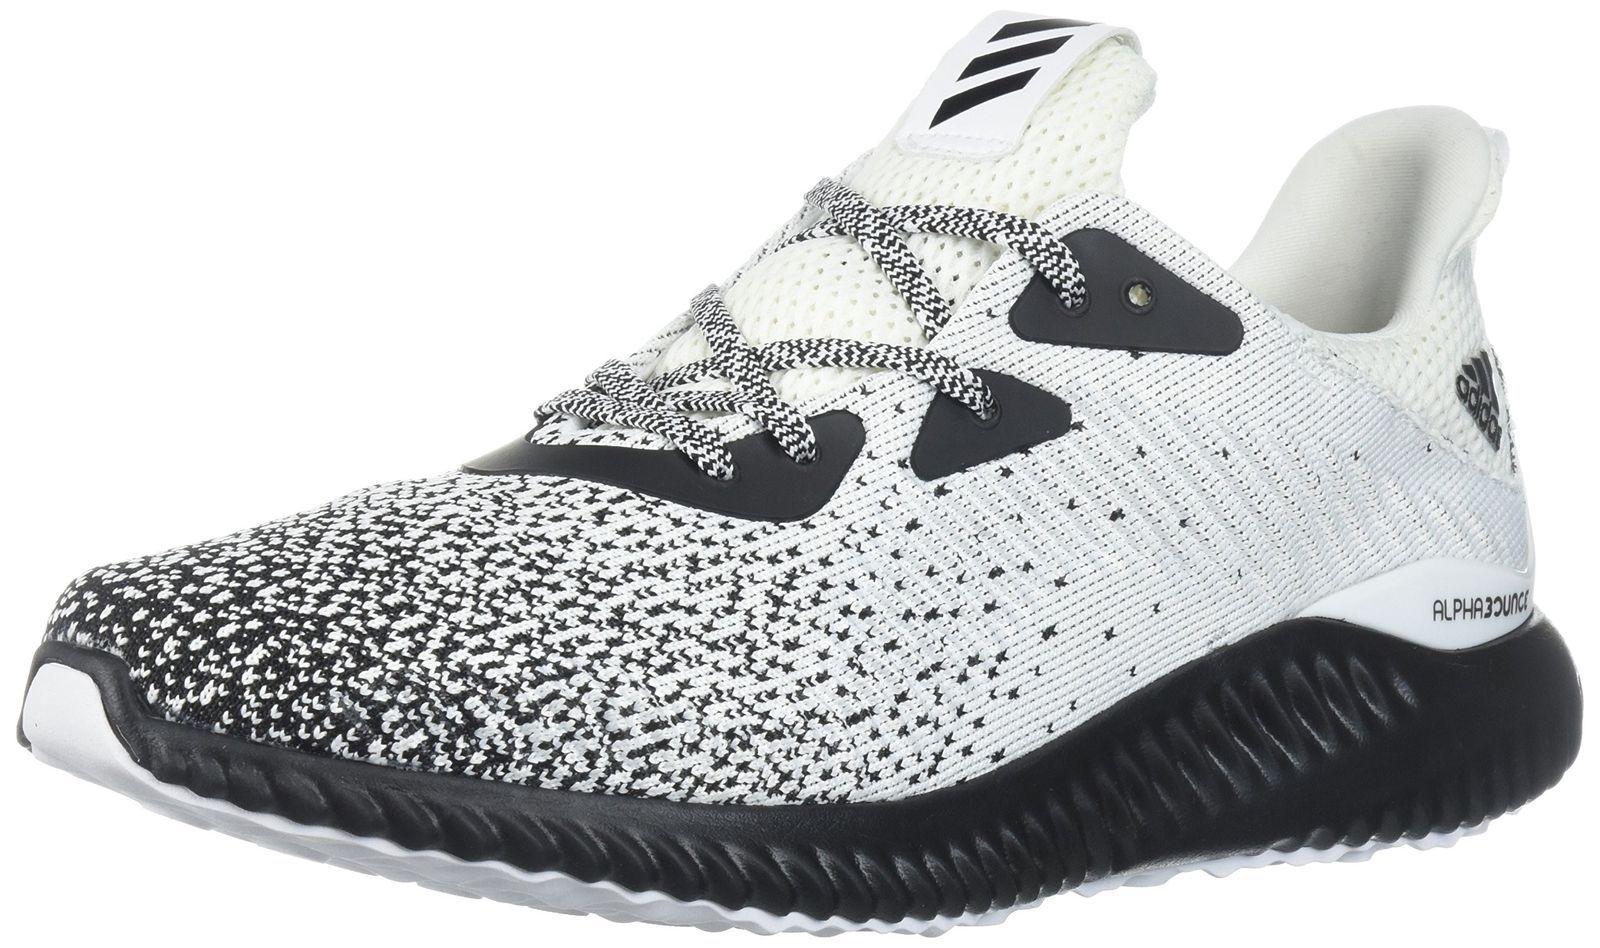 Black and White Athletic Clothing Logo - adidas Alphabounce Ck Mens Cq0406 Black White Forgedmesh Running ...